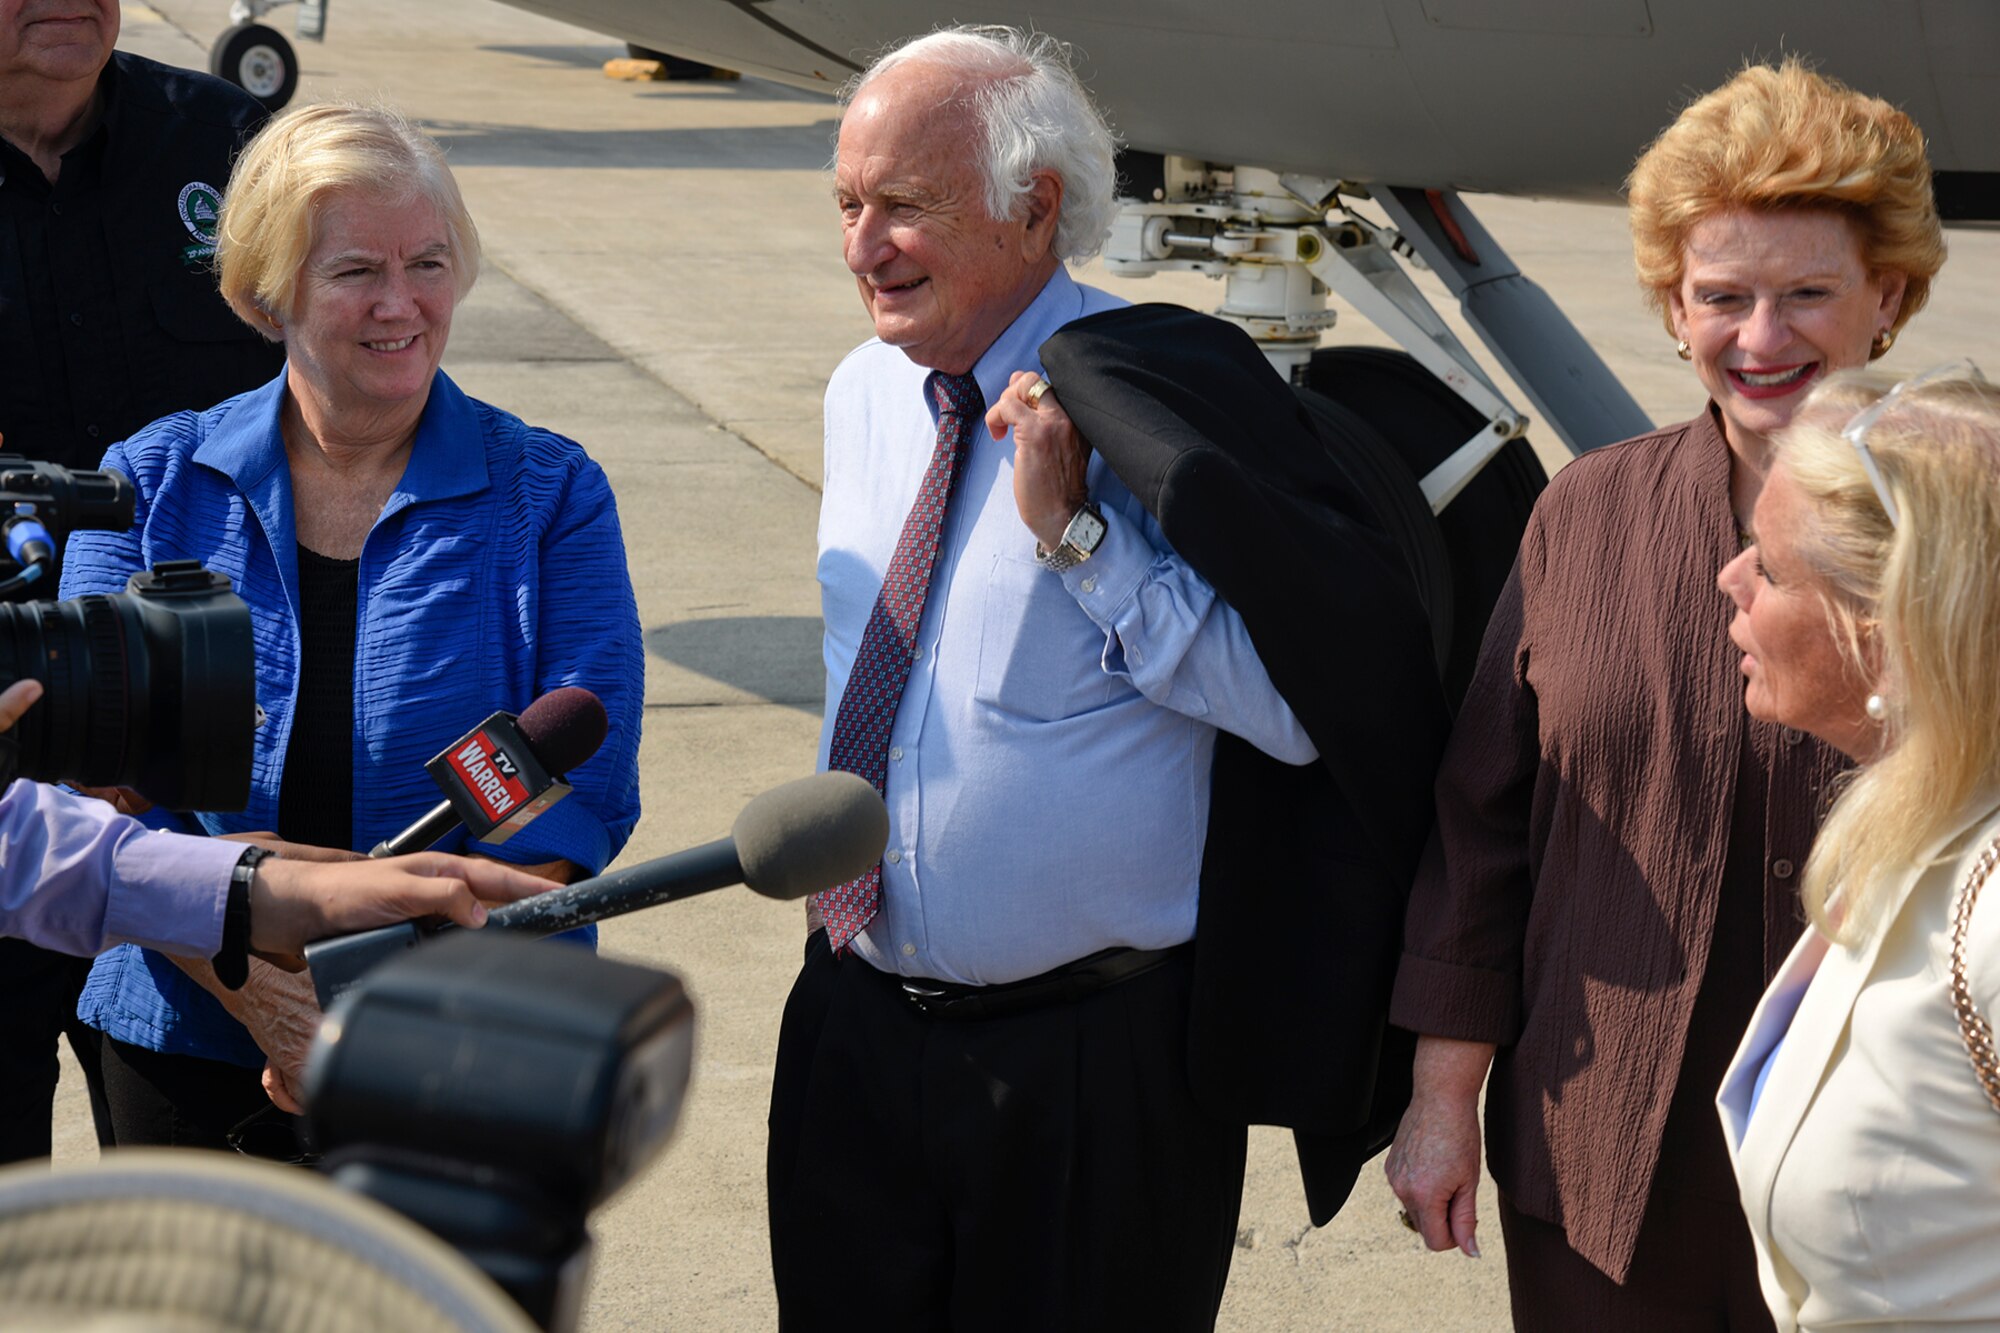 150902-Z-MI929-009 – U.S. Reps. Candice Miller, R-Mich., and Sander Levin, D-Mich., U.S. Sen. Debbie Stabenow, D-Mich., and U.S. Rep. Debbie Dingell, D-Mich., speak with reporters during a tour of Selfridge Air National Guard Base, Mich., Sept. 2, 2015. Seven members of the Michigan Congressional delegation spent Sept. 2 and 3 touring the major military installations located in Michigan. (U.S. Air National Guard photo by Terry Atwell / Released)